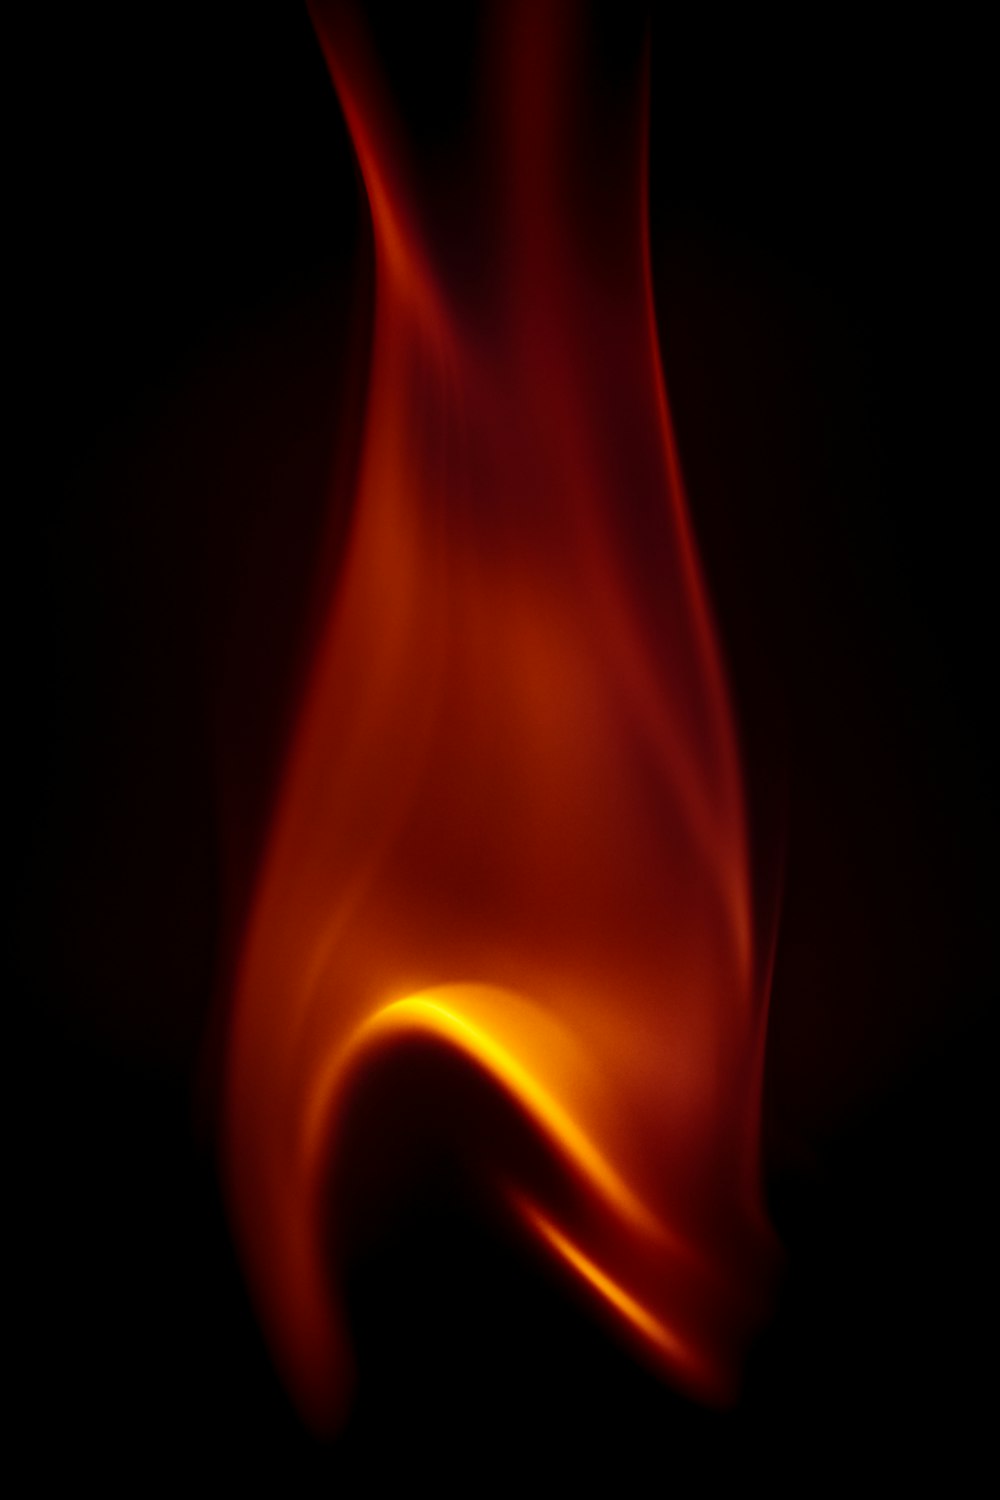 red and yellow fire illustration